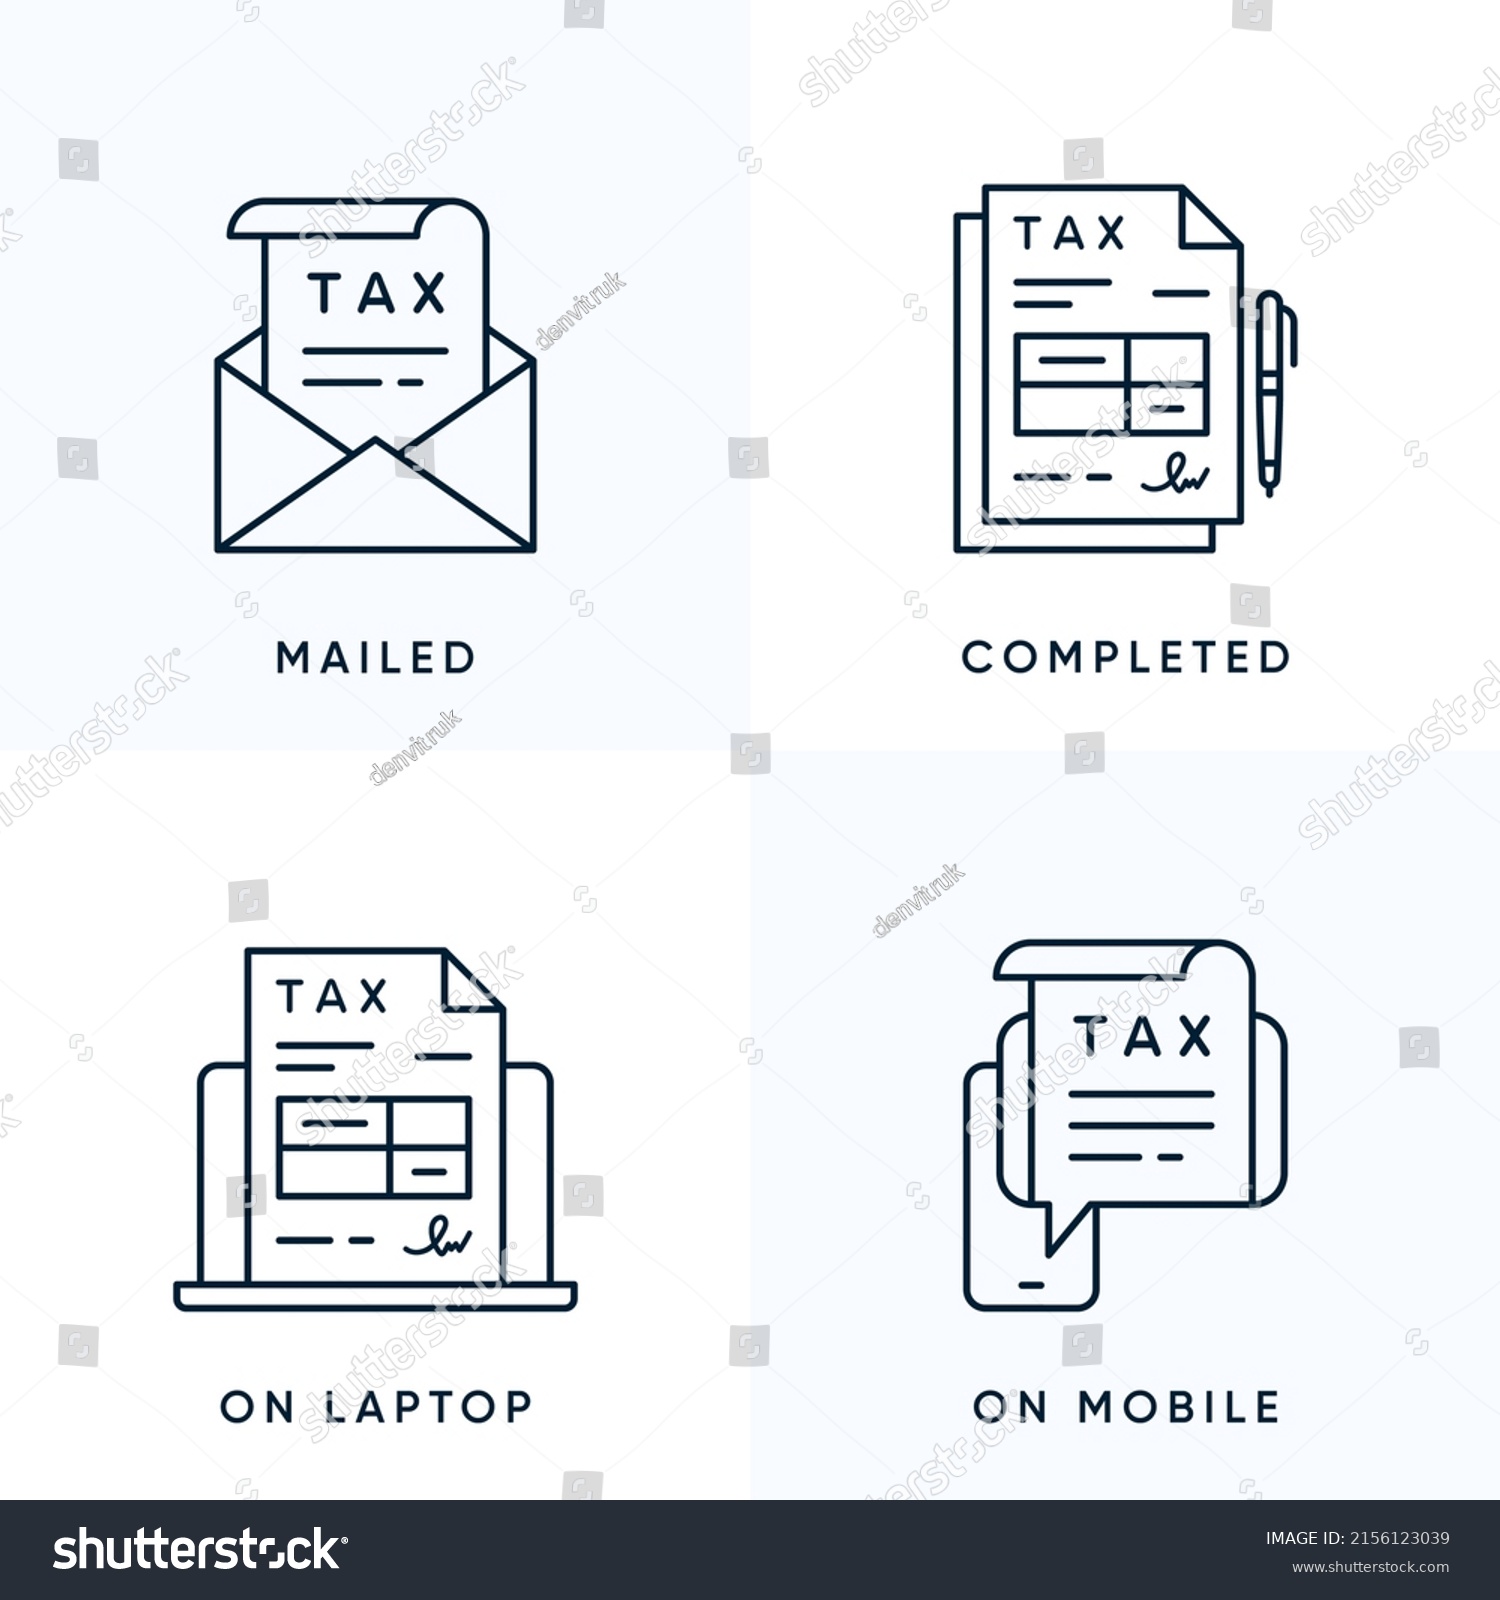 tax-return-form-icon-set-contains-stock-vector-royalty-free